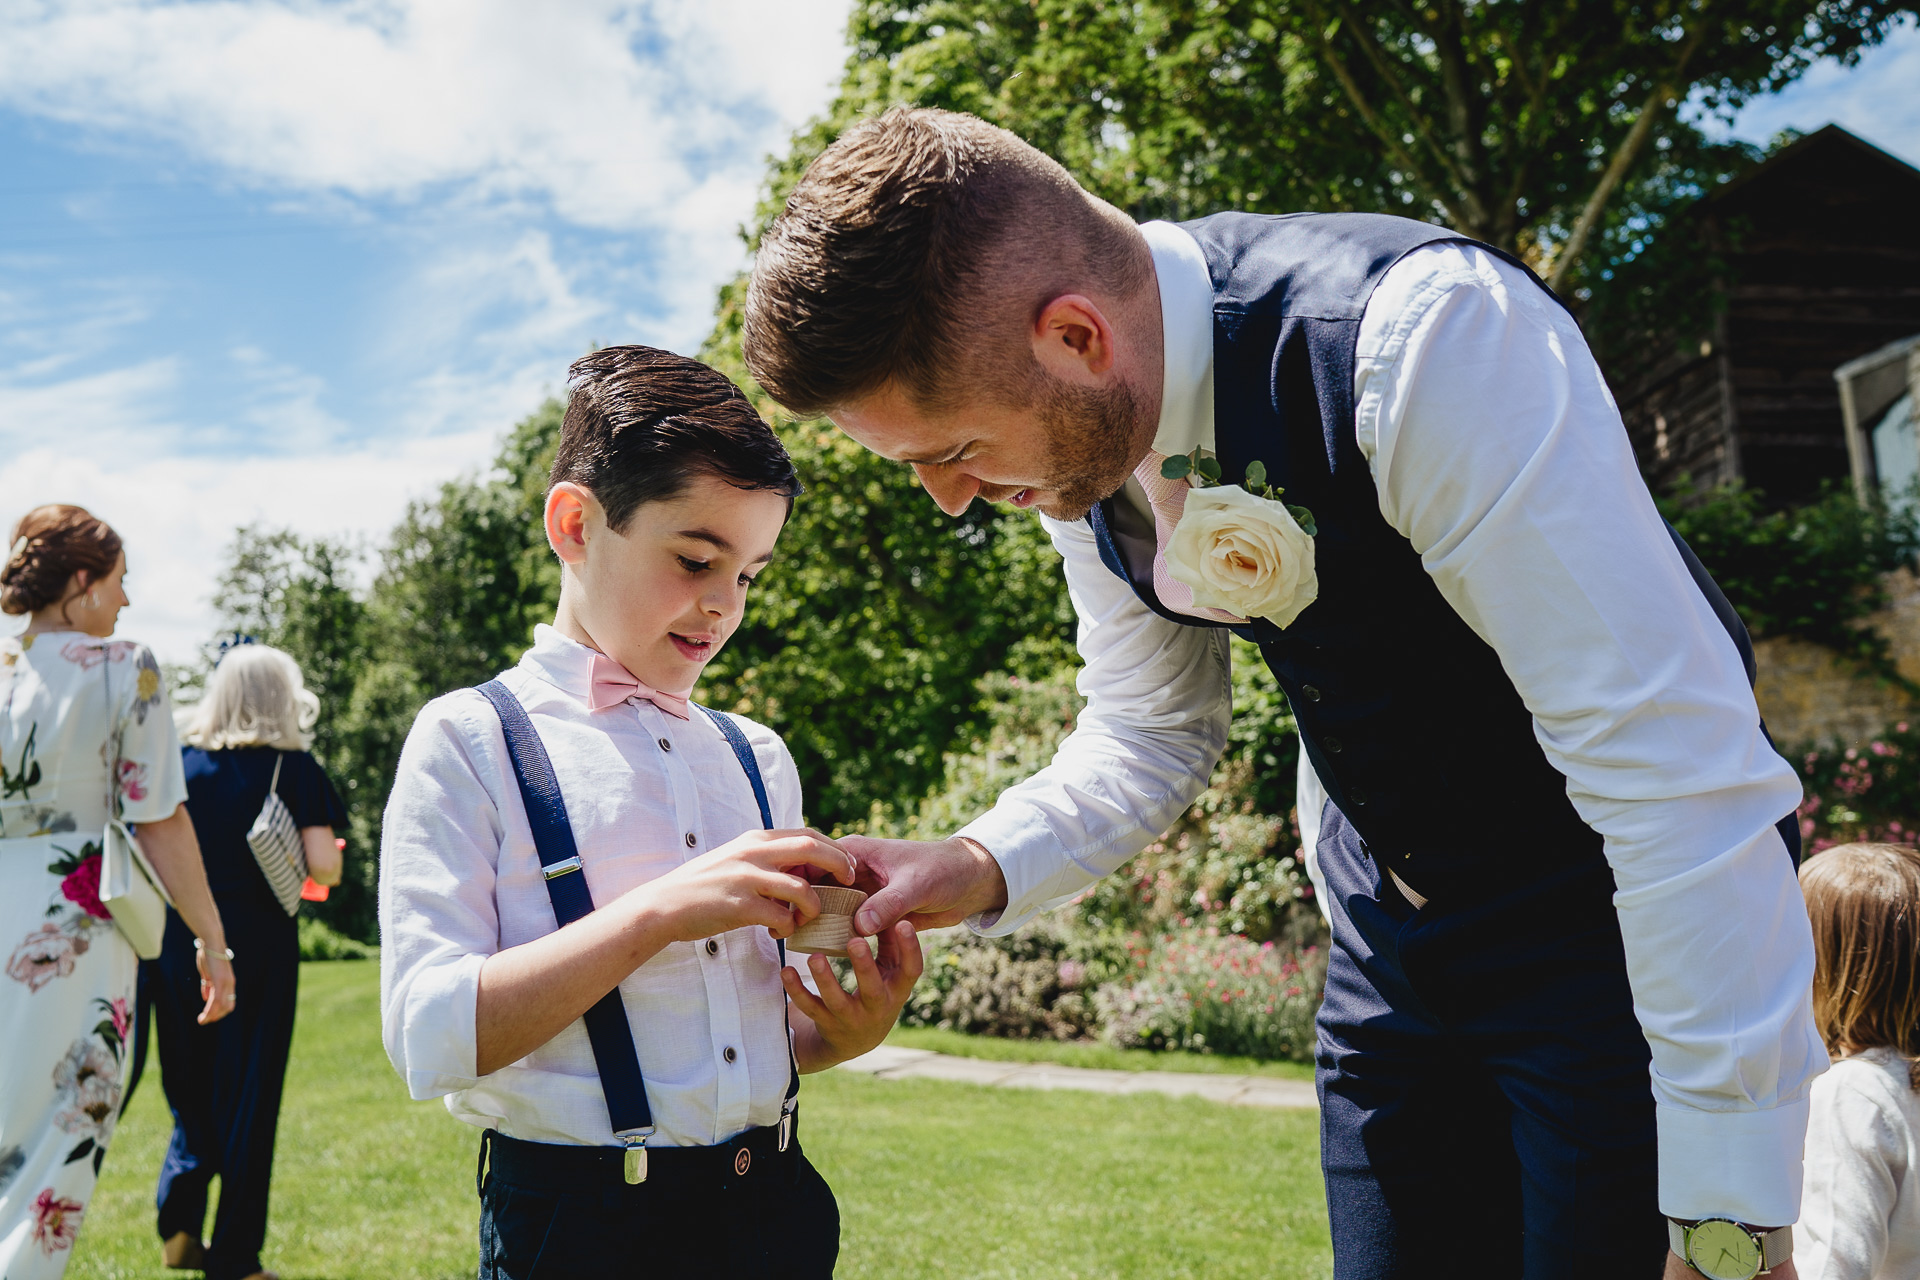 Best man and page boy holding wedding rings